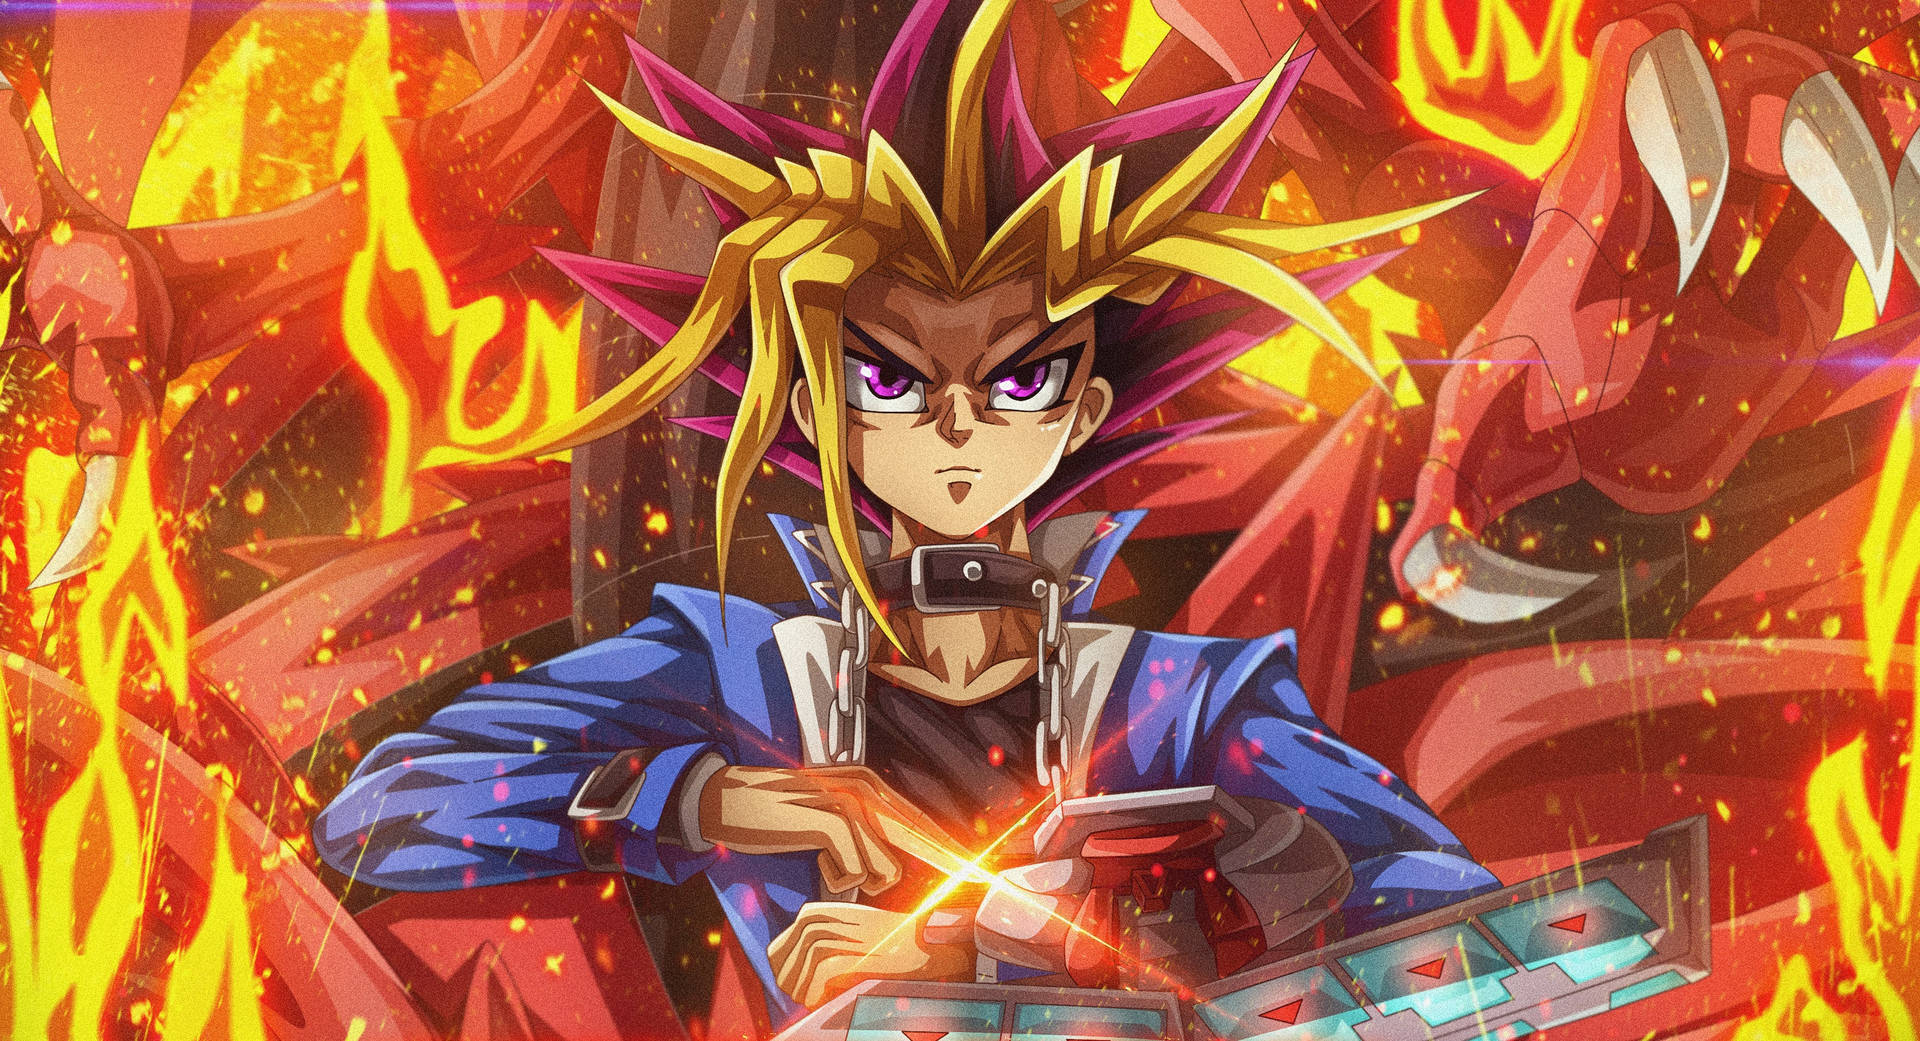 Free Yugioh Wallpaper Downloads, [100+] Yugioh Wallpapers for FREE |  